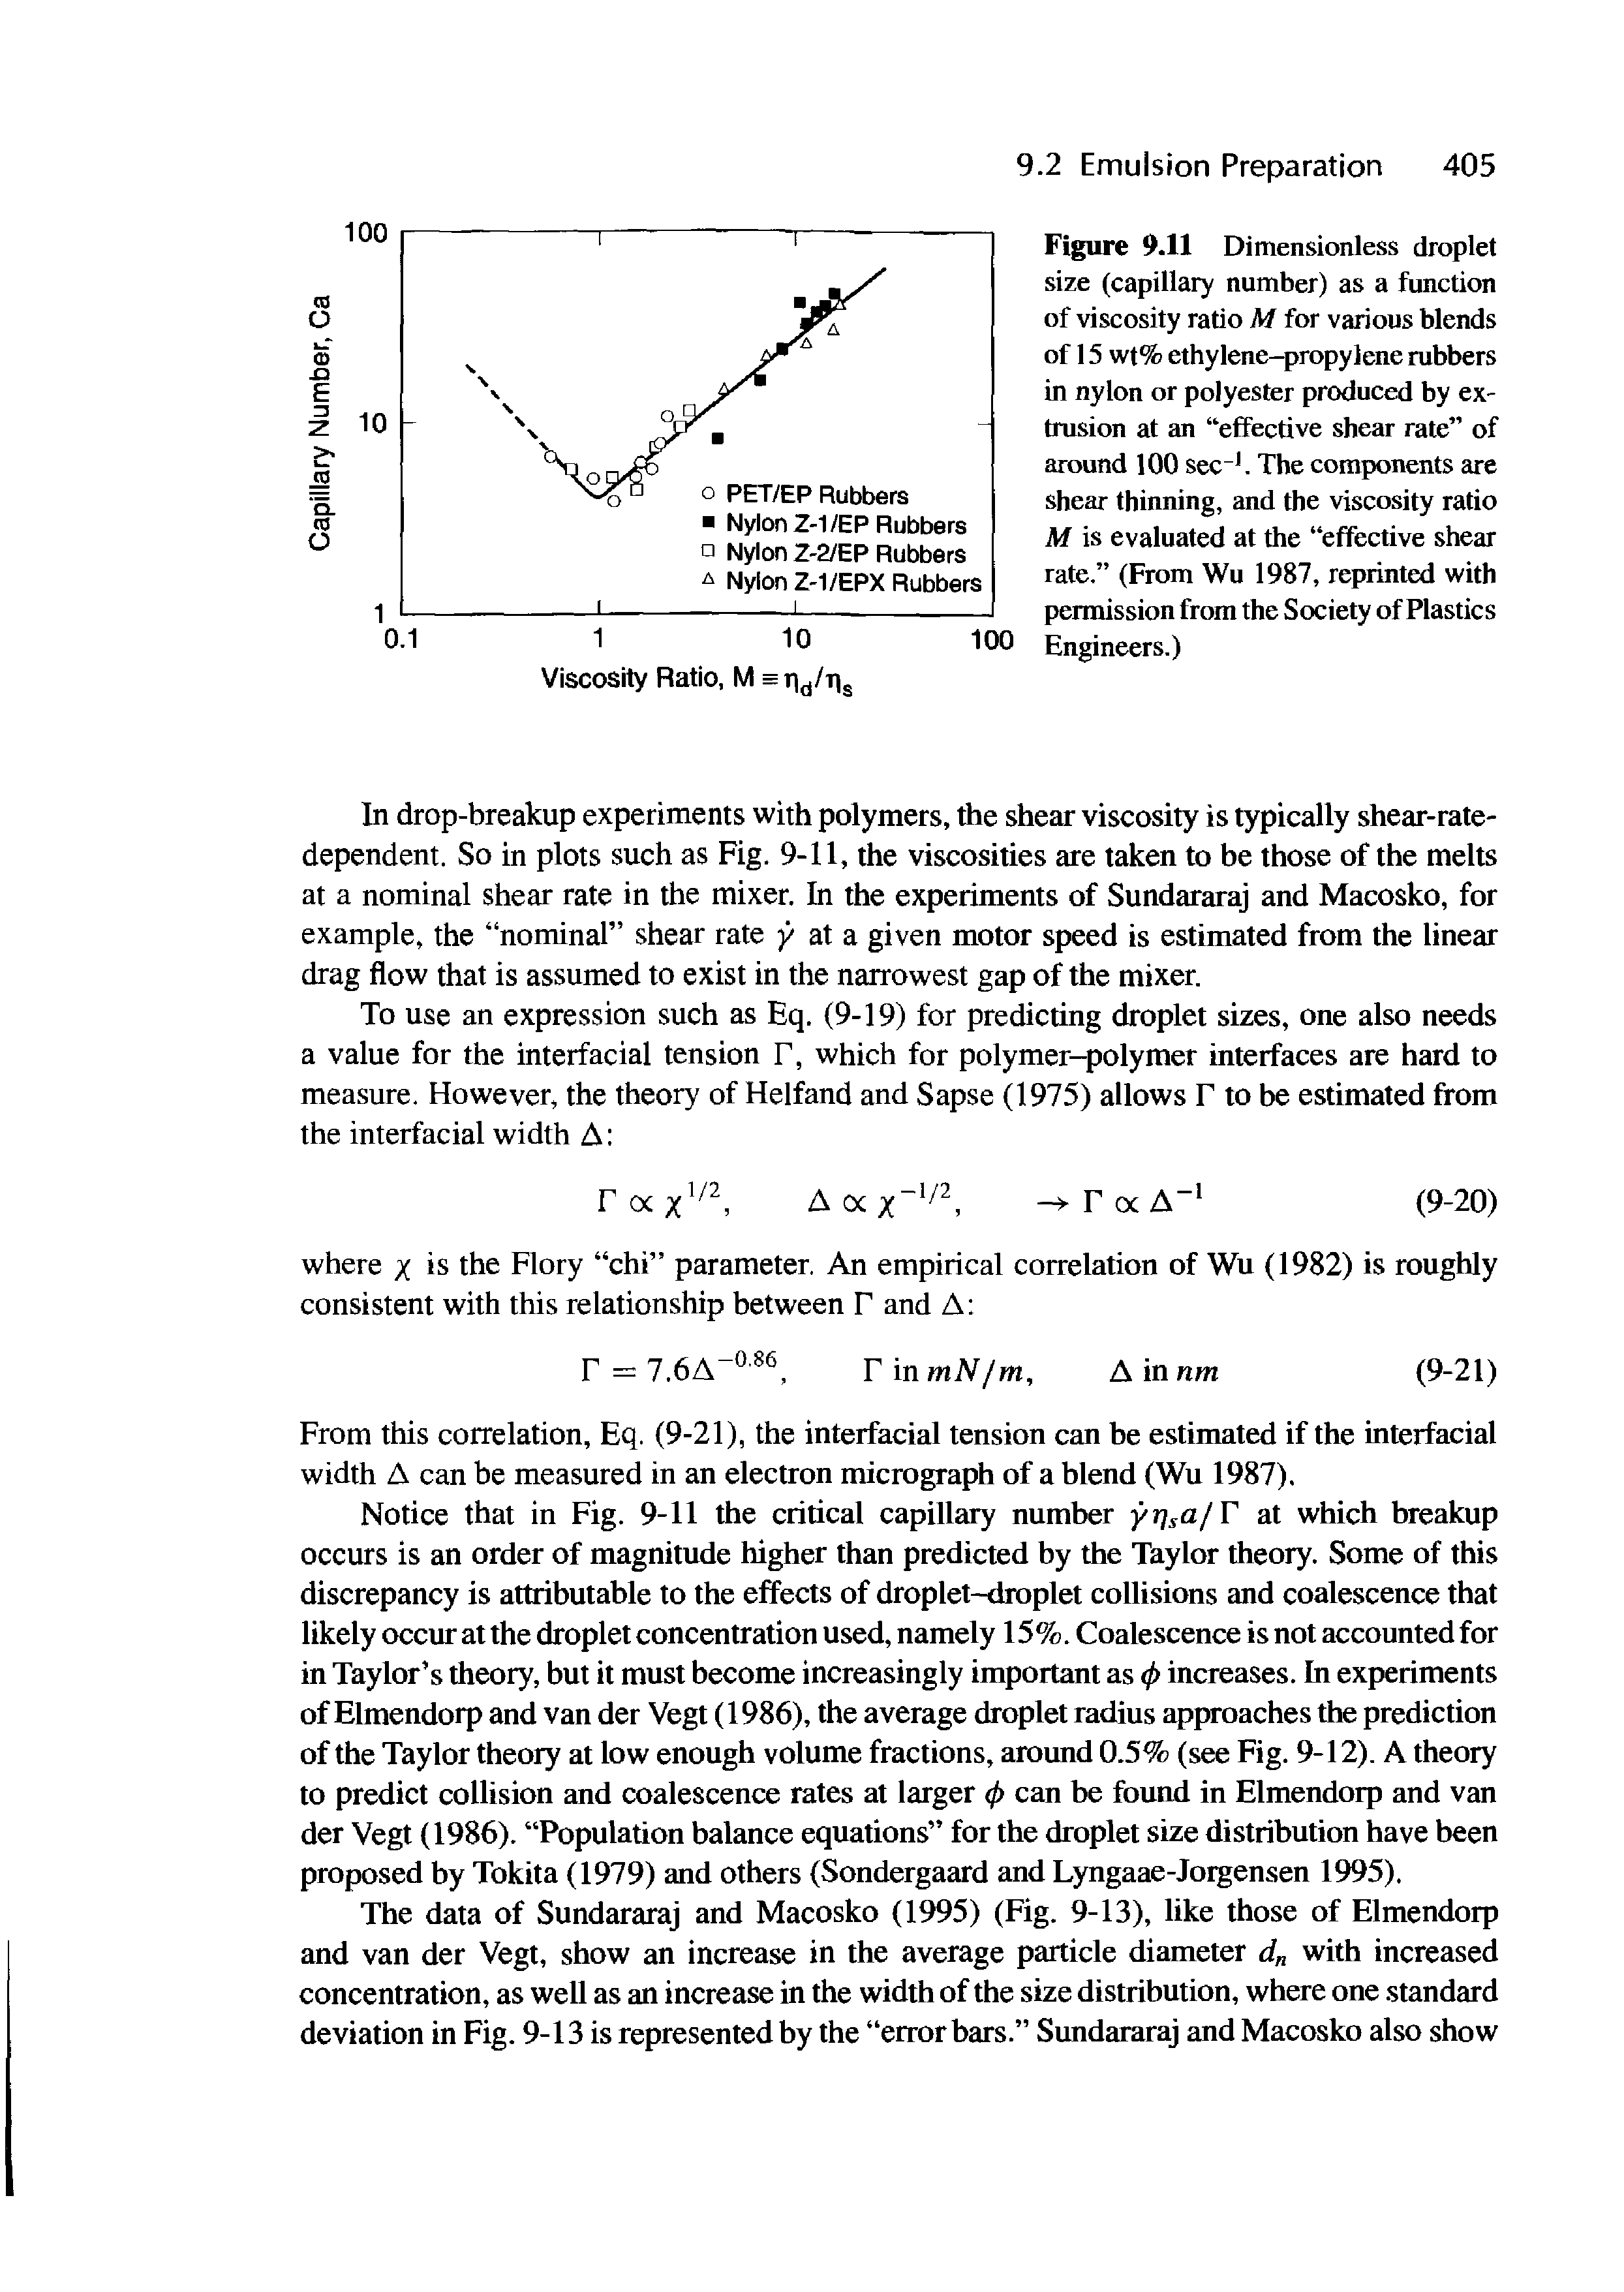 Figure 9.11 Dimensionless droplet size (capillary number) as a function of viscosity ratio M for various blends of 15 wt% ethylene-propylene rubbers in nylon or polyester produced by ex-trusion at an effective shear rate of around 100 sec The components are shear thinning, and the viscosity ratio M is evaluated at the effective shear rate. (From Wu 1987, reprinted with permission from the Society of Plastics Engineers.)...